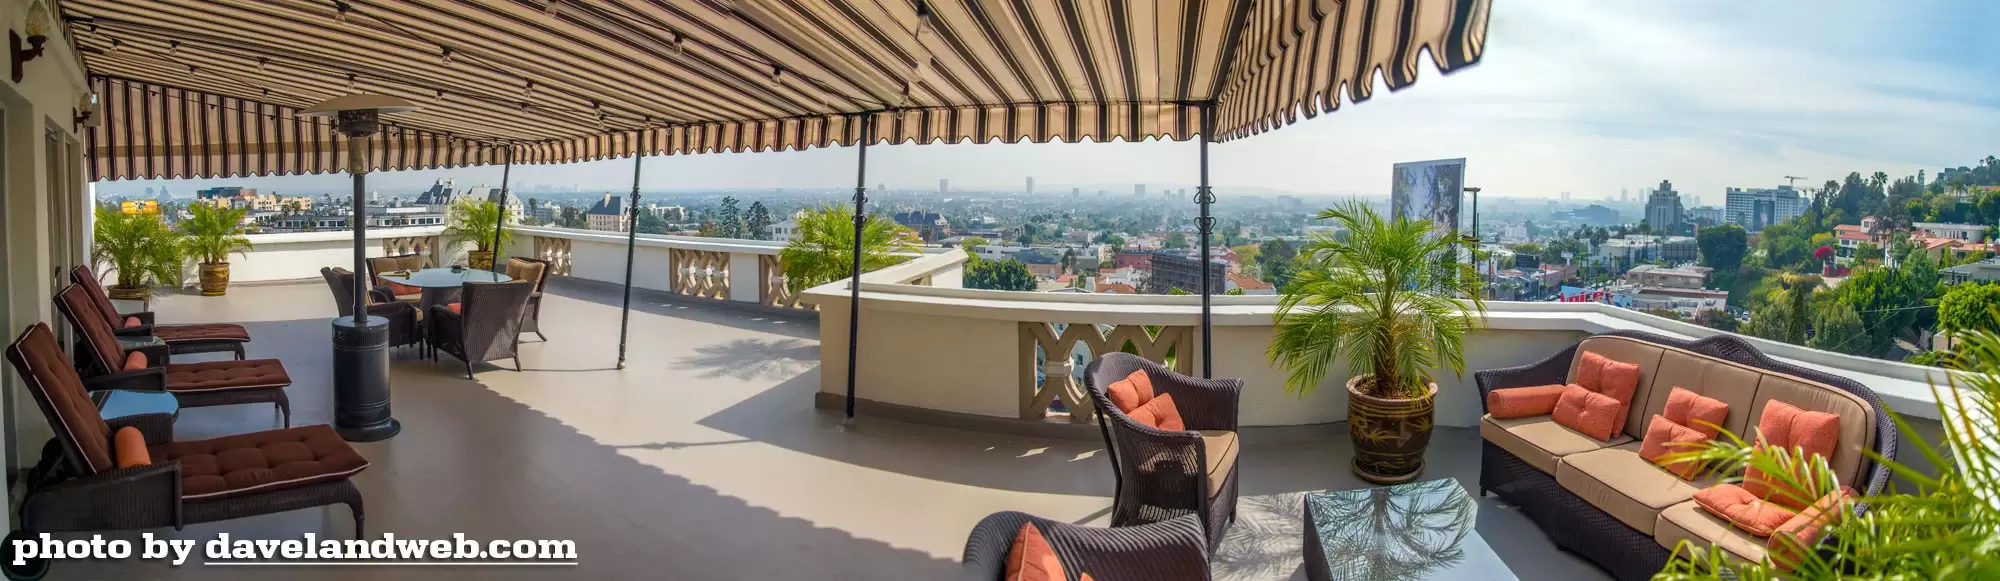 Chateau Marmont presidential suite